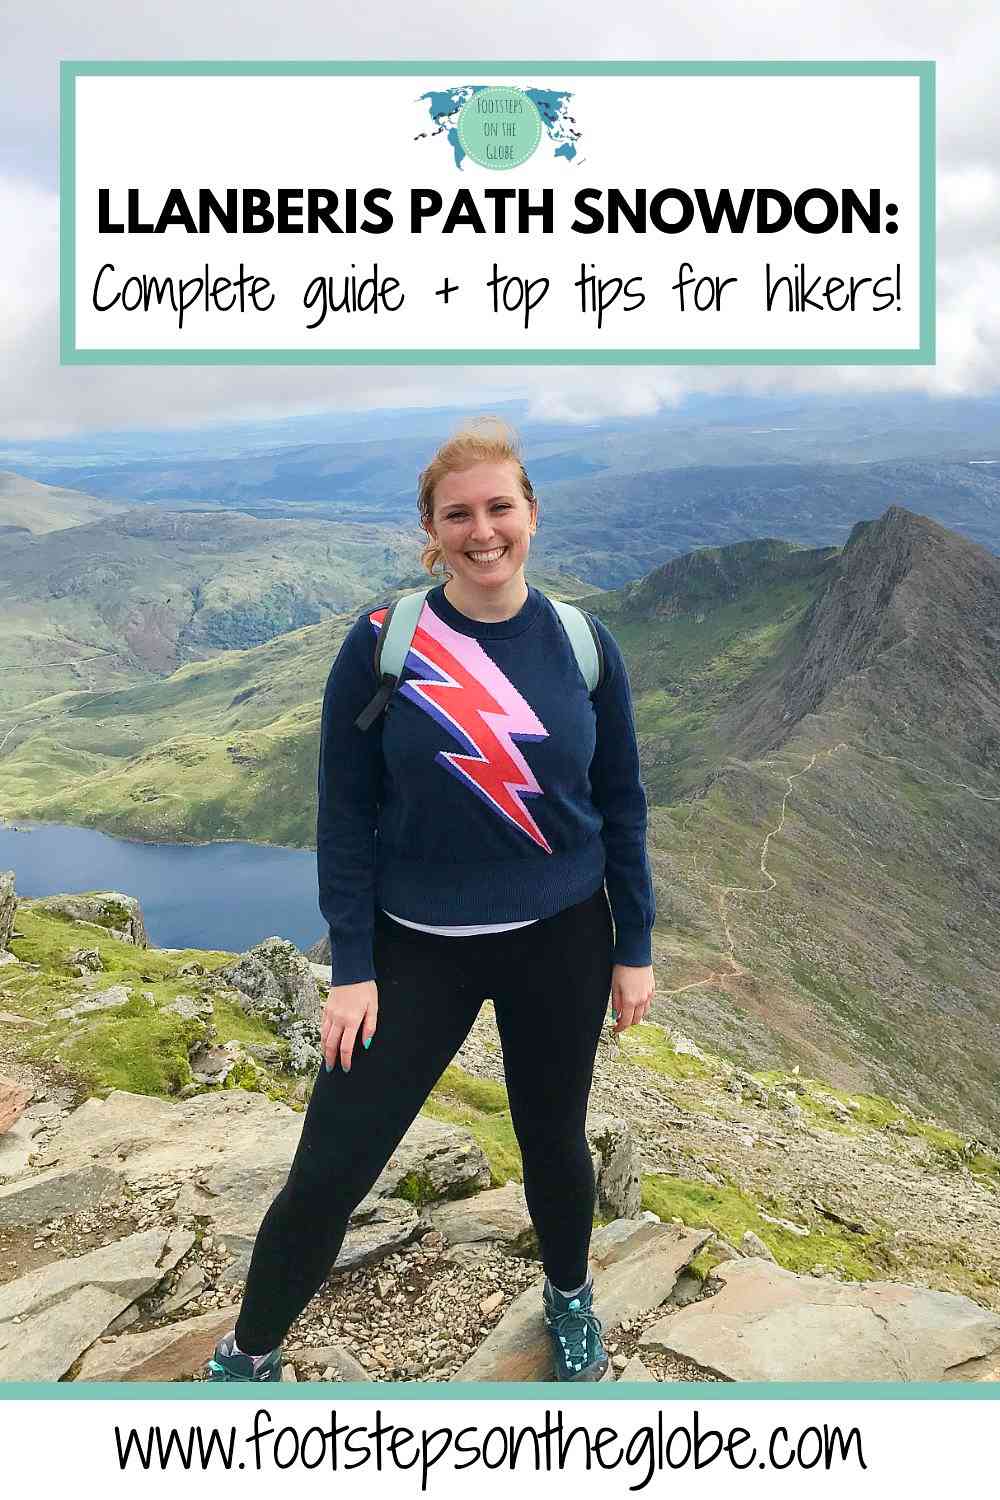 Mel smiling wearing a lightning bolt jumper at the summit of Snowdon with Snowdonia National Park peaks in the background with the text: "Llanberis Path Snowdon: Complete guide and top tips for hikers! Pinterest image